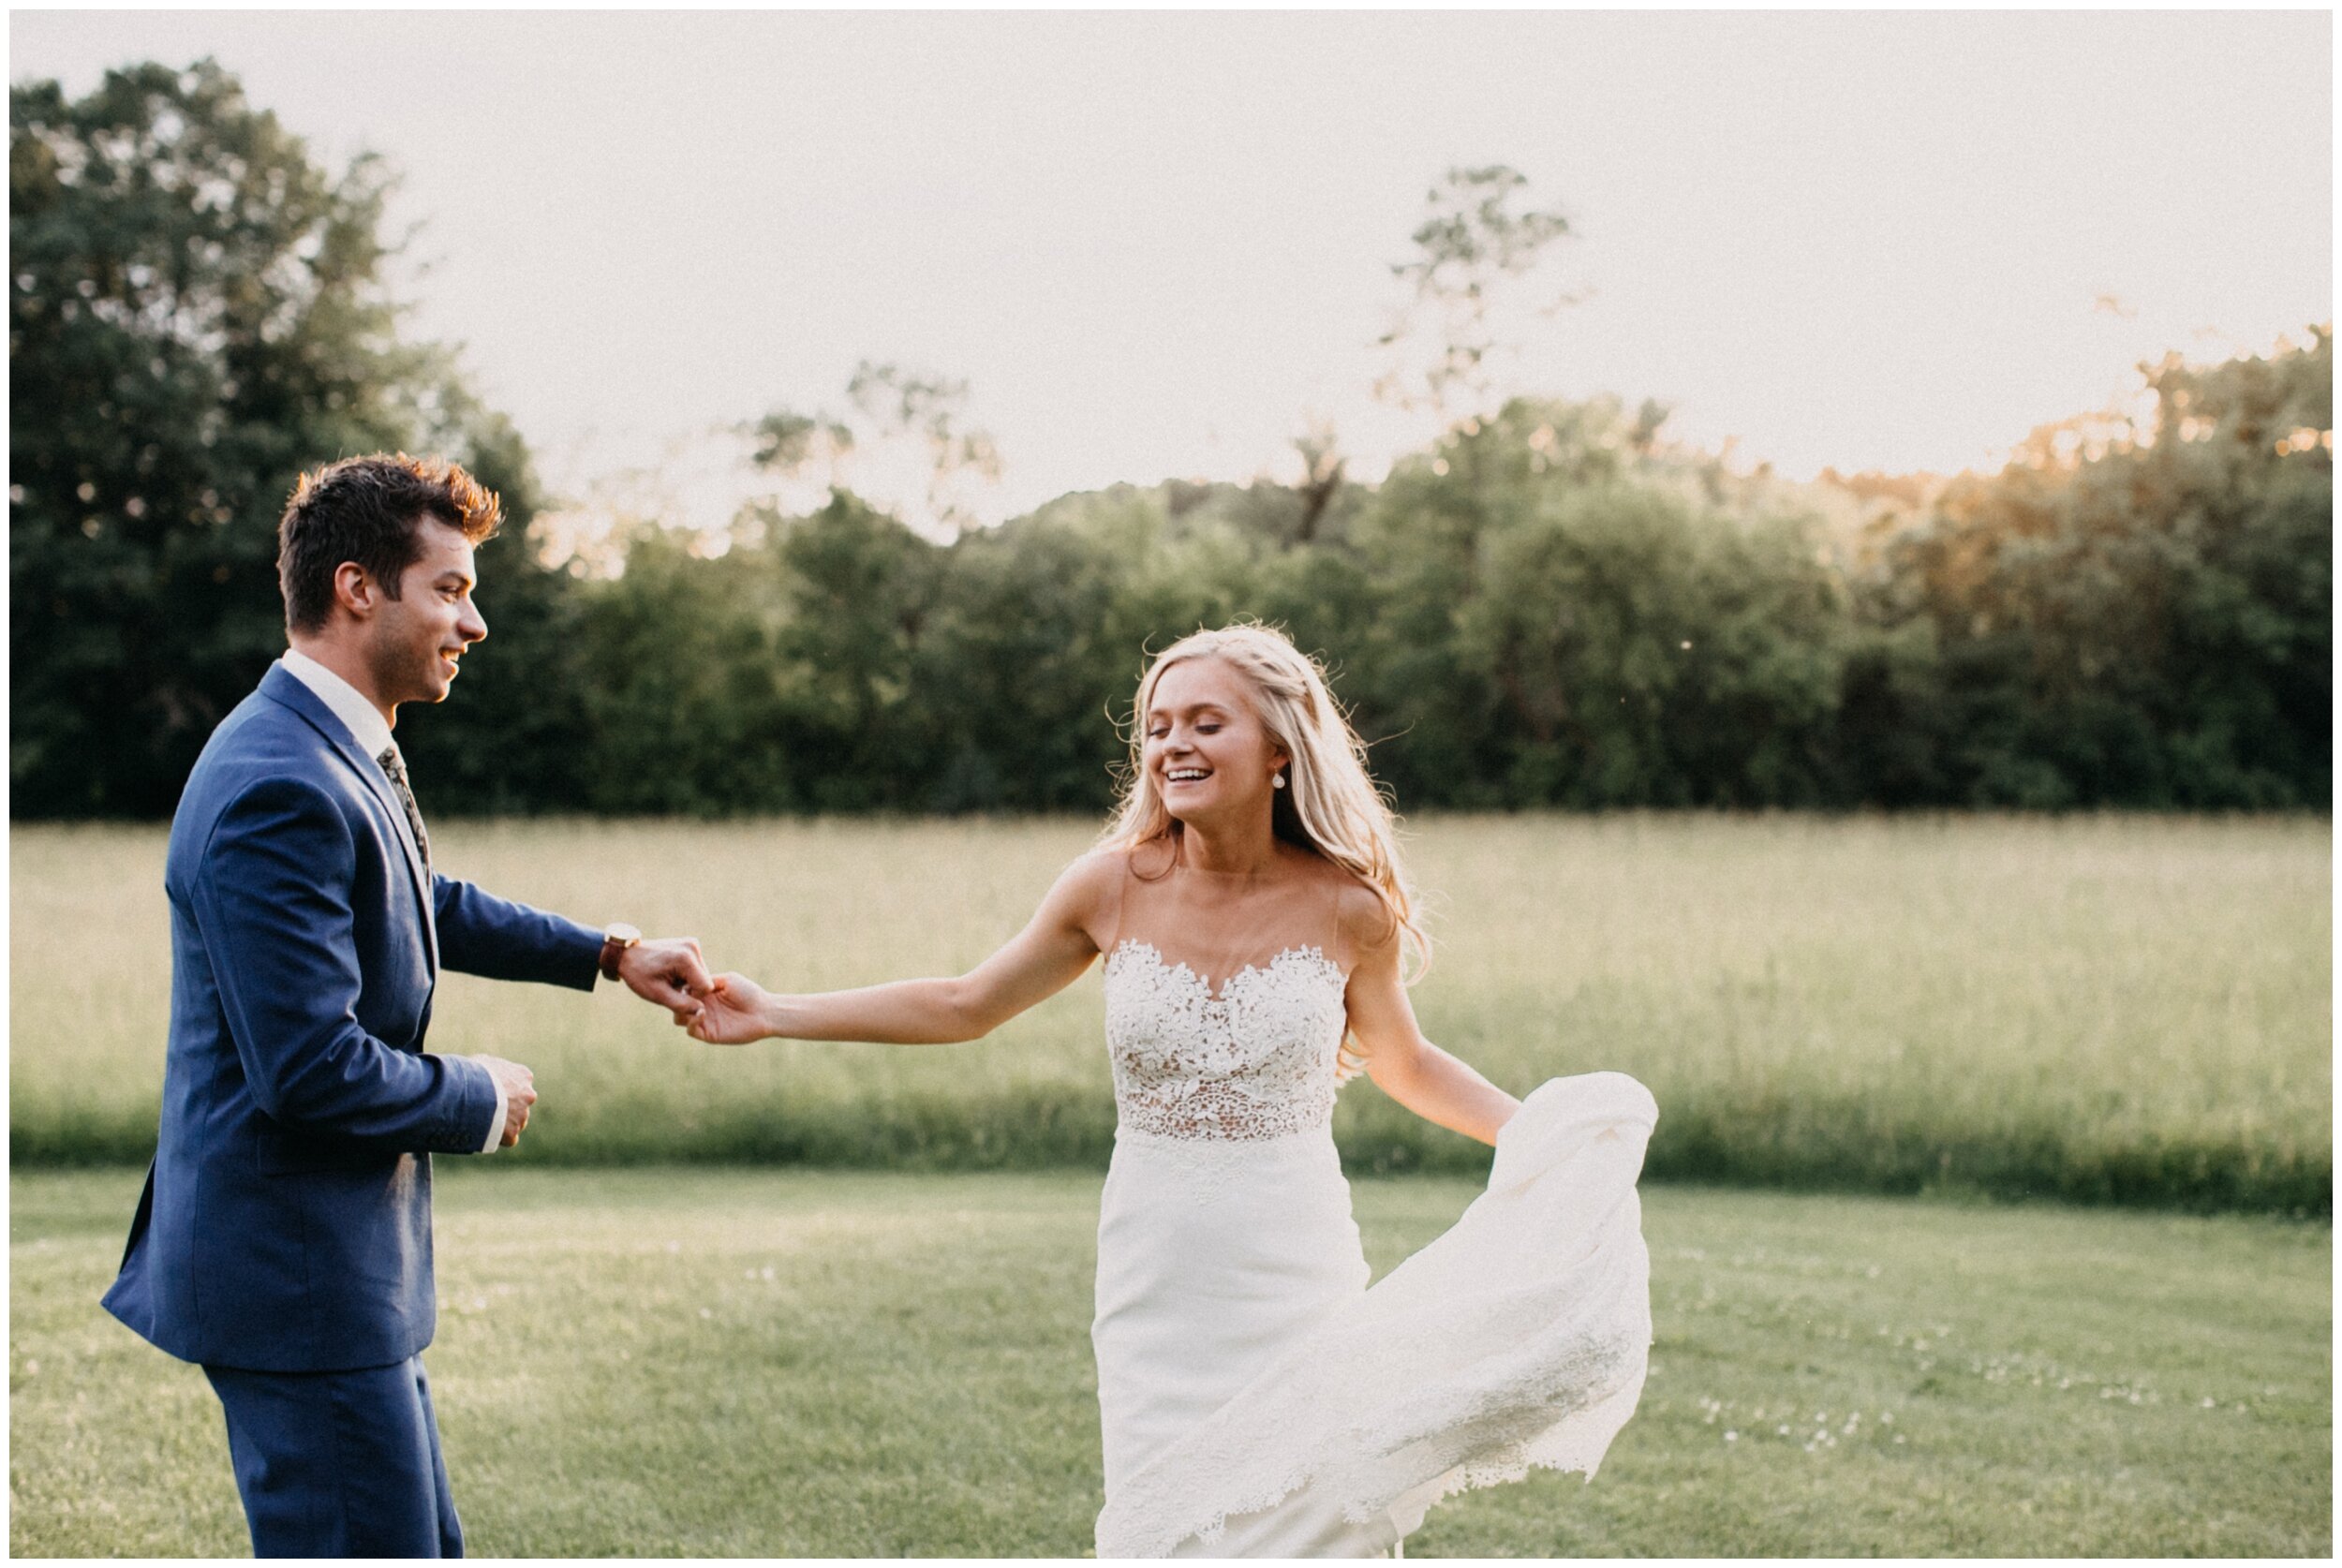 Bride and groom dancing during sunset at Minnesota farm wedding